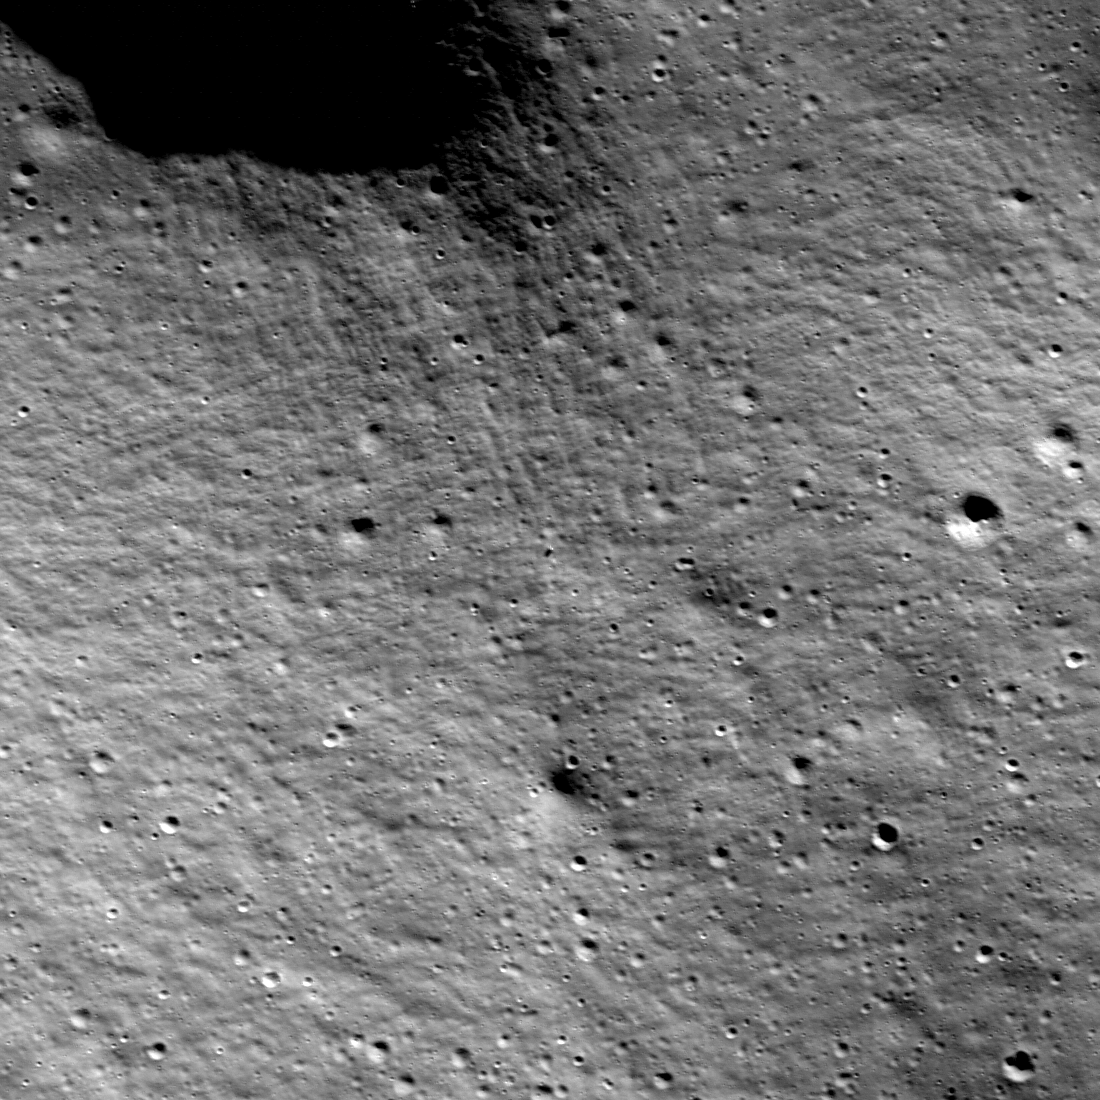 grayscale image of Moon's rocky surface from above, with a small white dot at the center of the frame: IM-1 lander